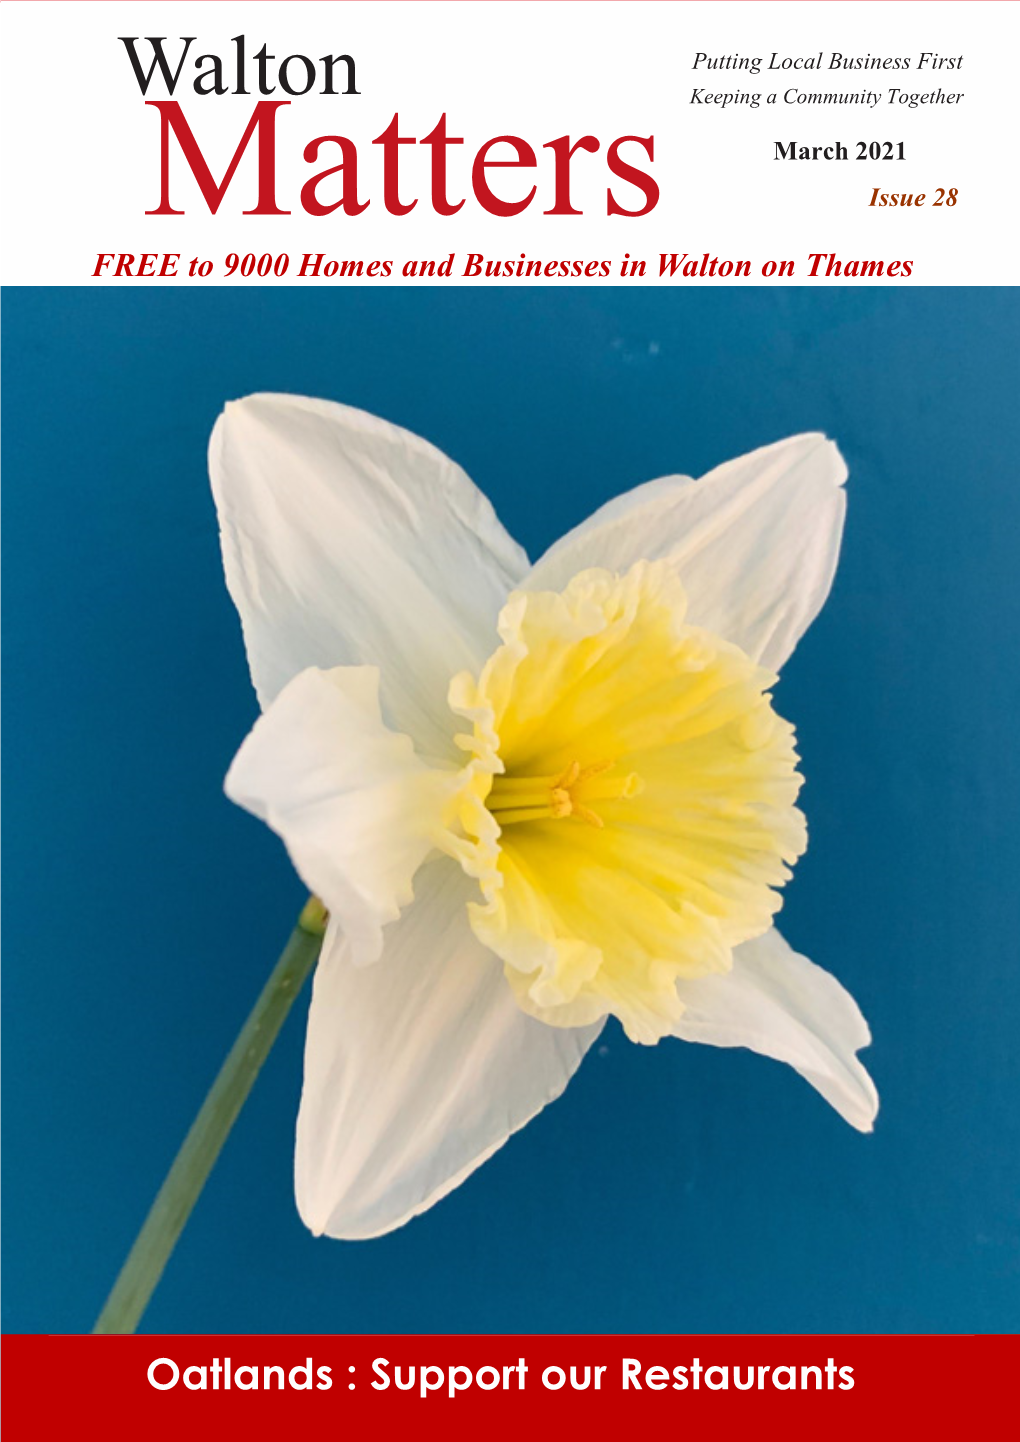 Walton Keeping a Community Together March 2021 Matters Issue 28 FREE to 9000 Homes and Businesses in Walton on Thames